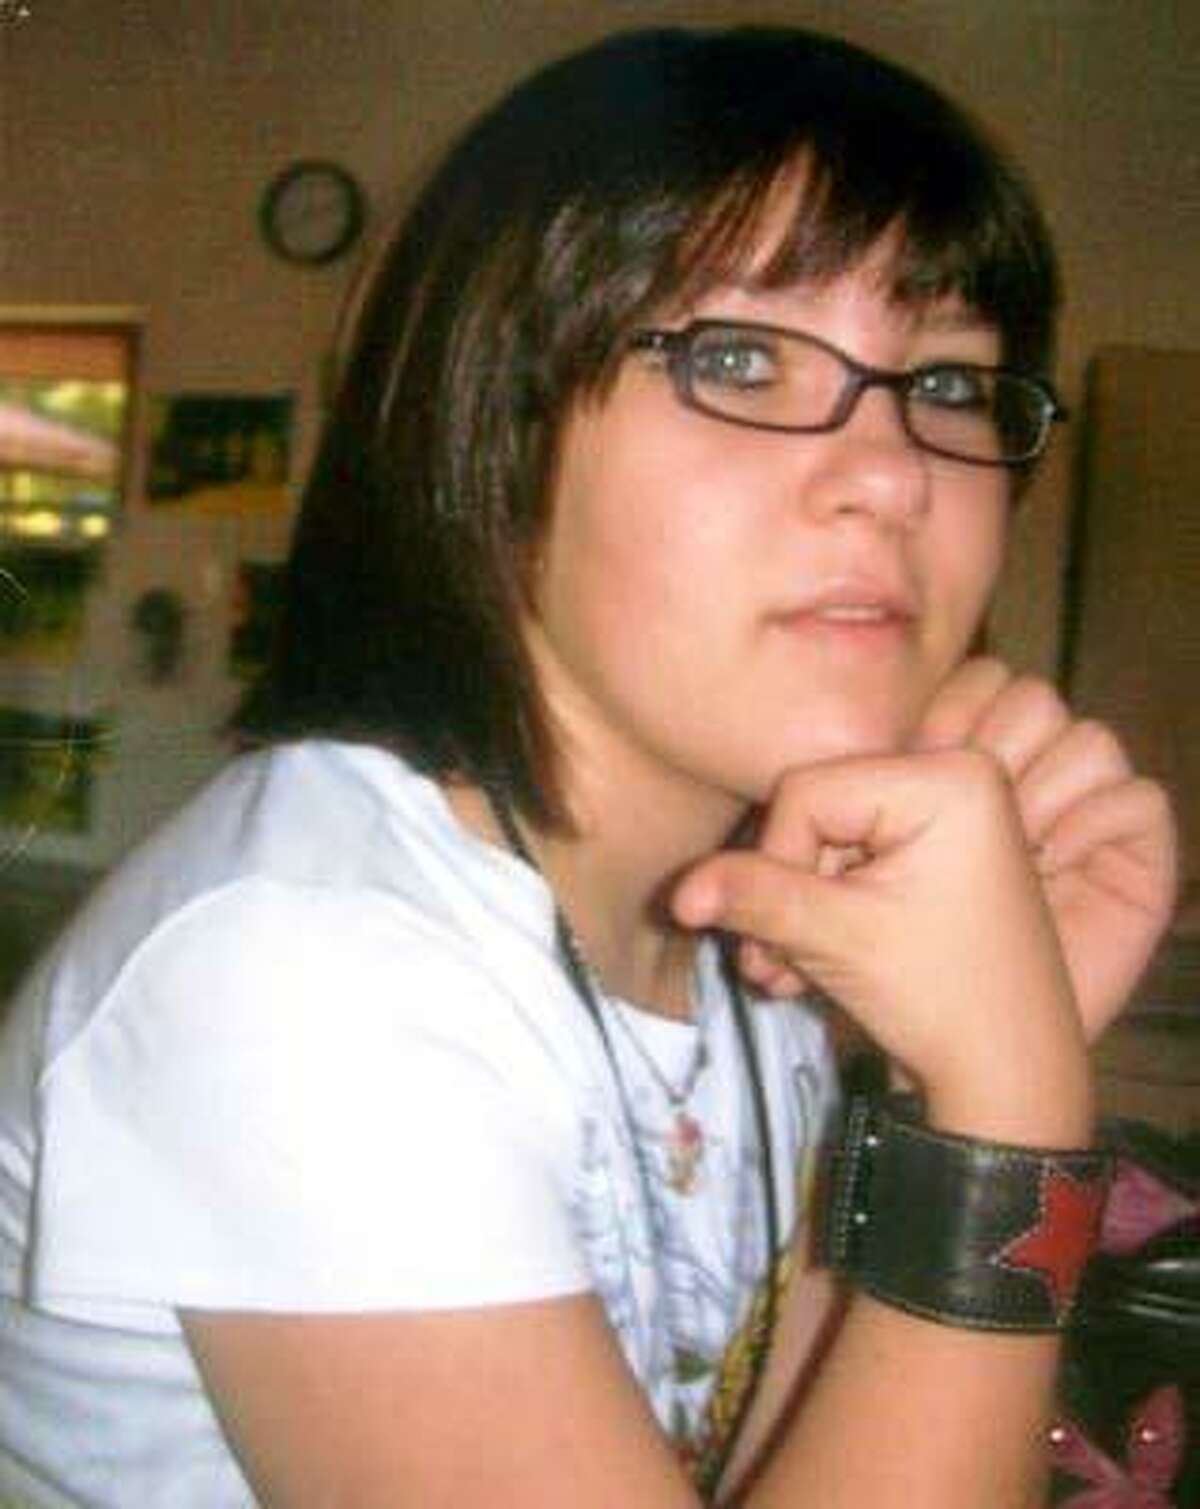 Nicole Lalime was 13 when she died in a traffic accident in 2008.